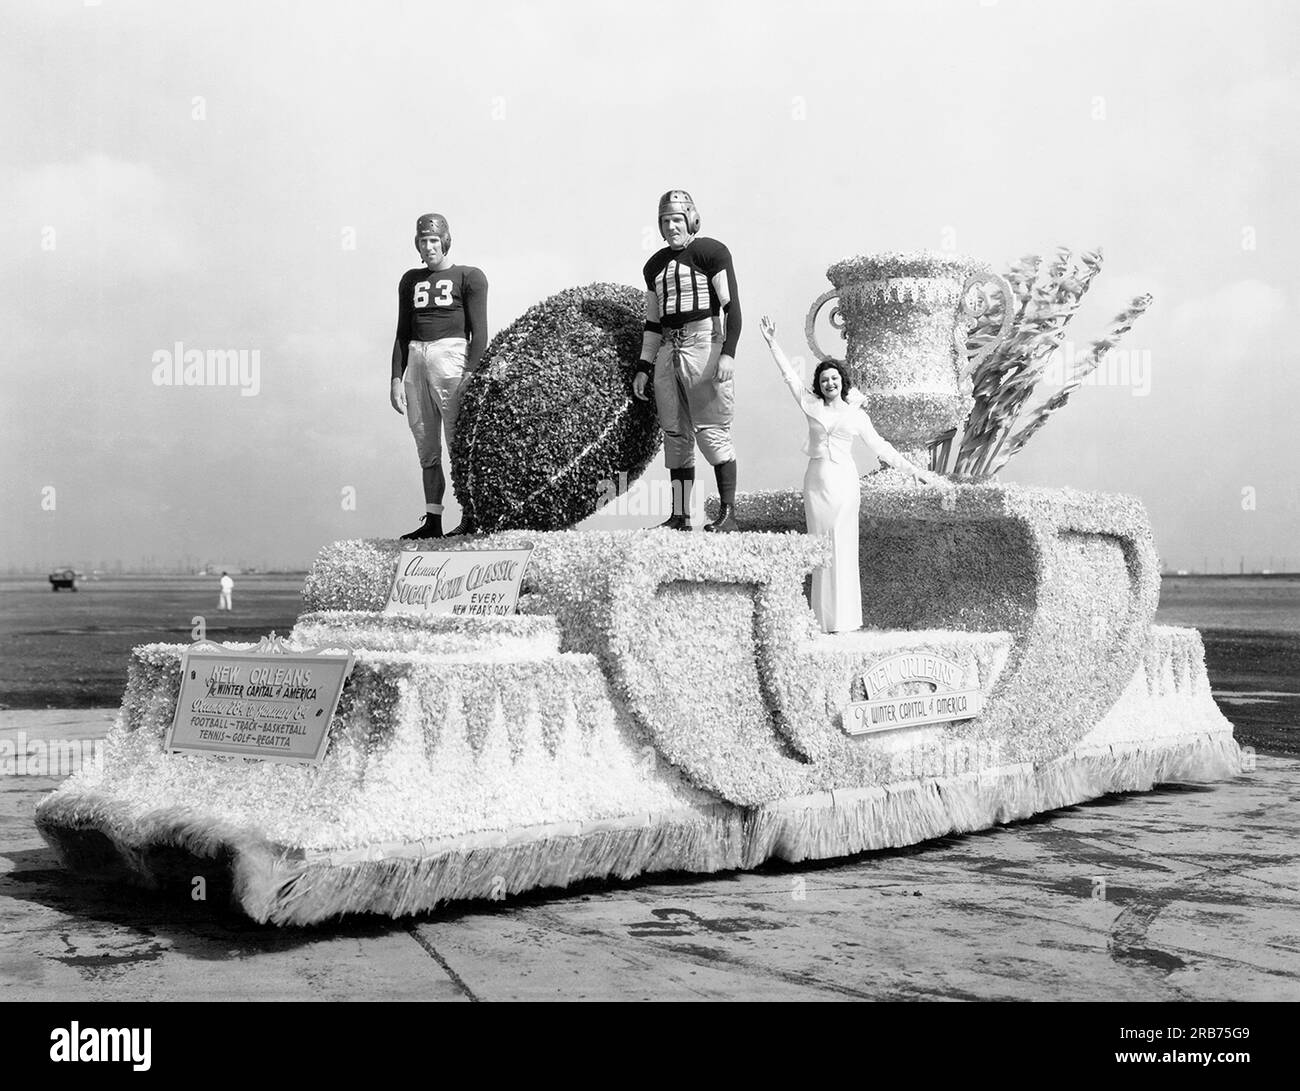 Atlantic City, New jersey:  September, 1936 Miss New Orleans with her Sugar Bowl float as it will appear in the Miss America parade on the Boardwalk this week. Stock Photo